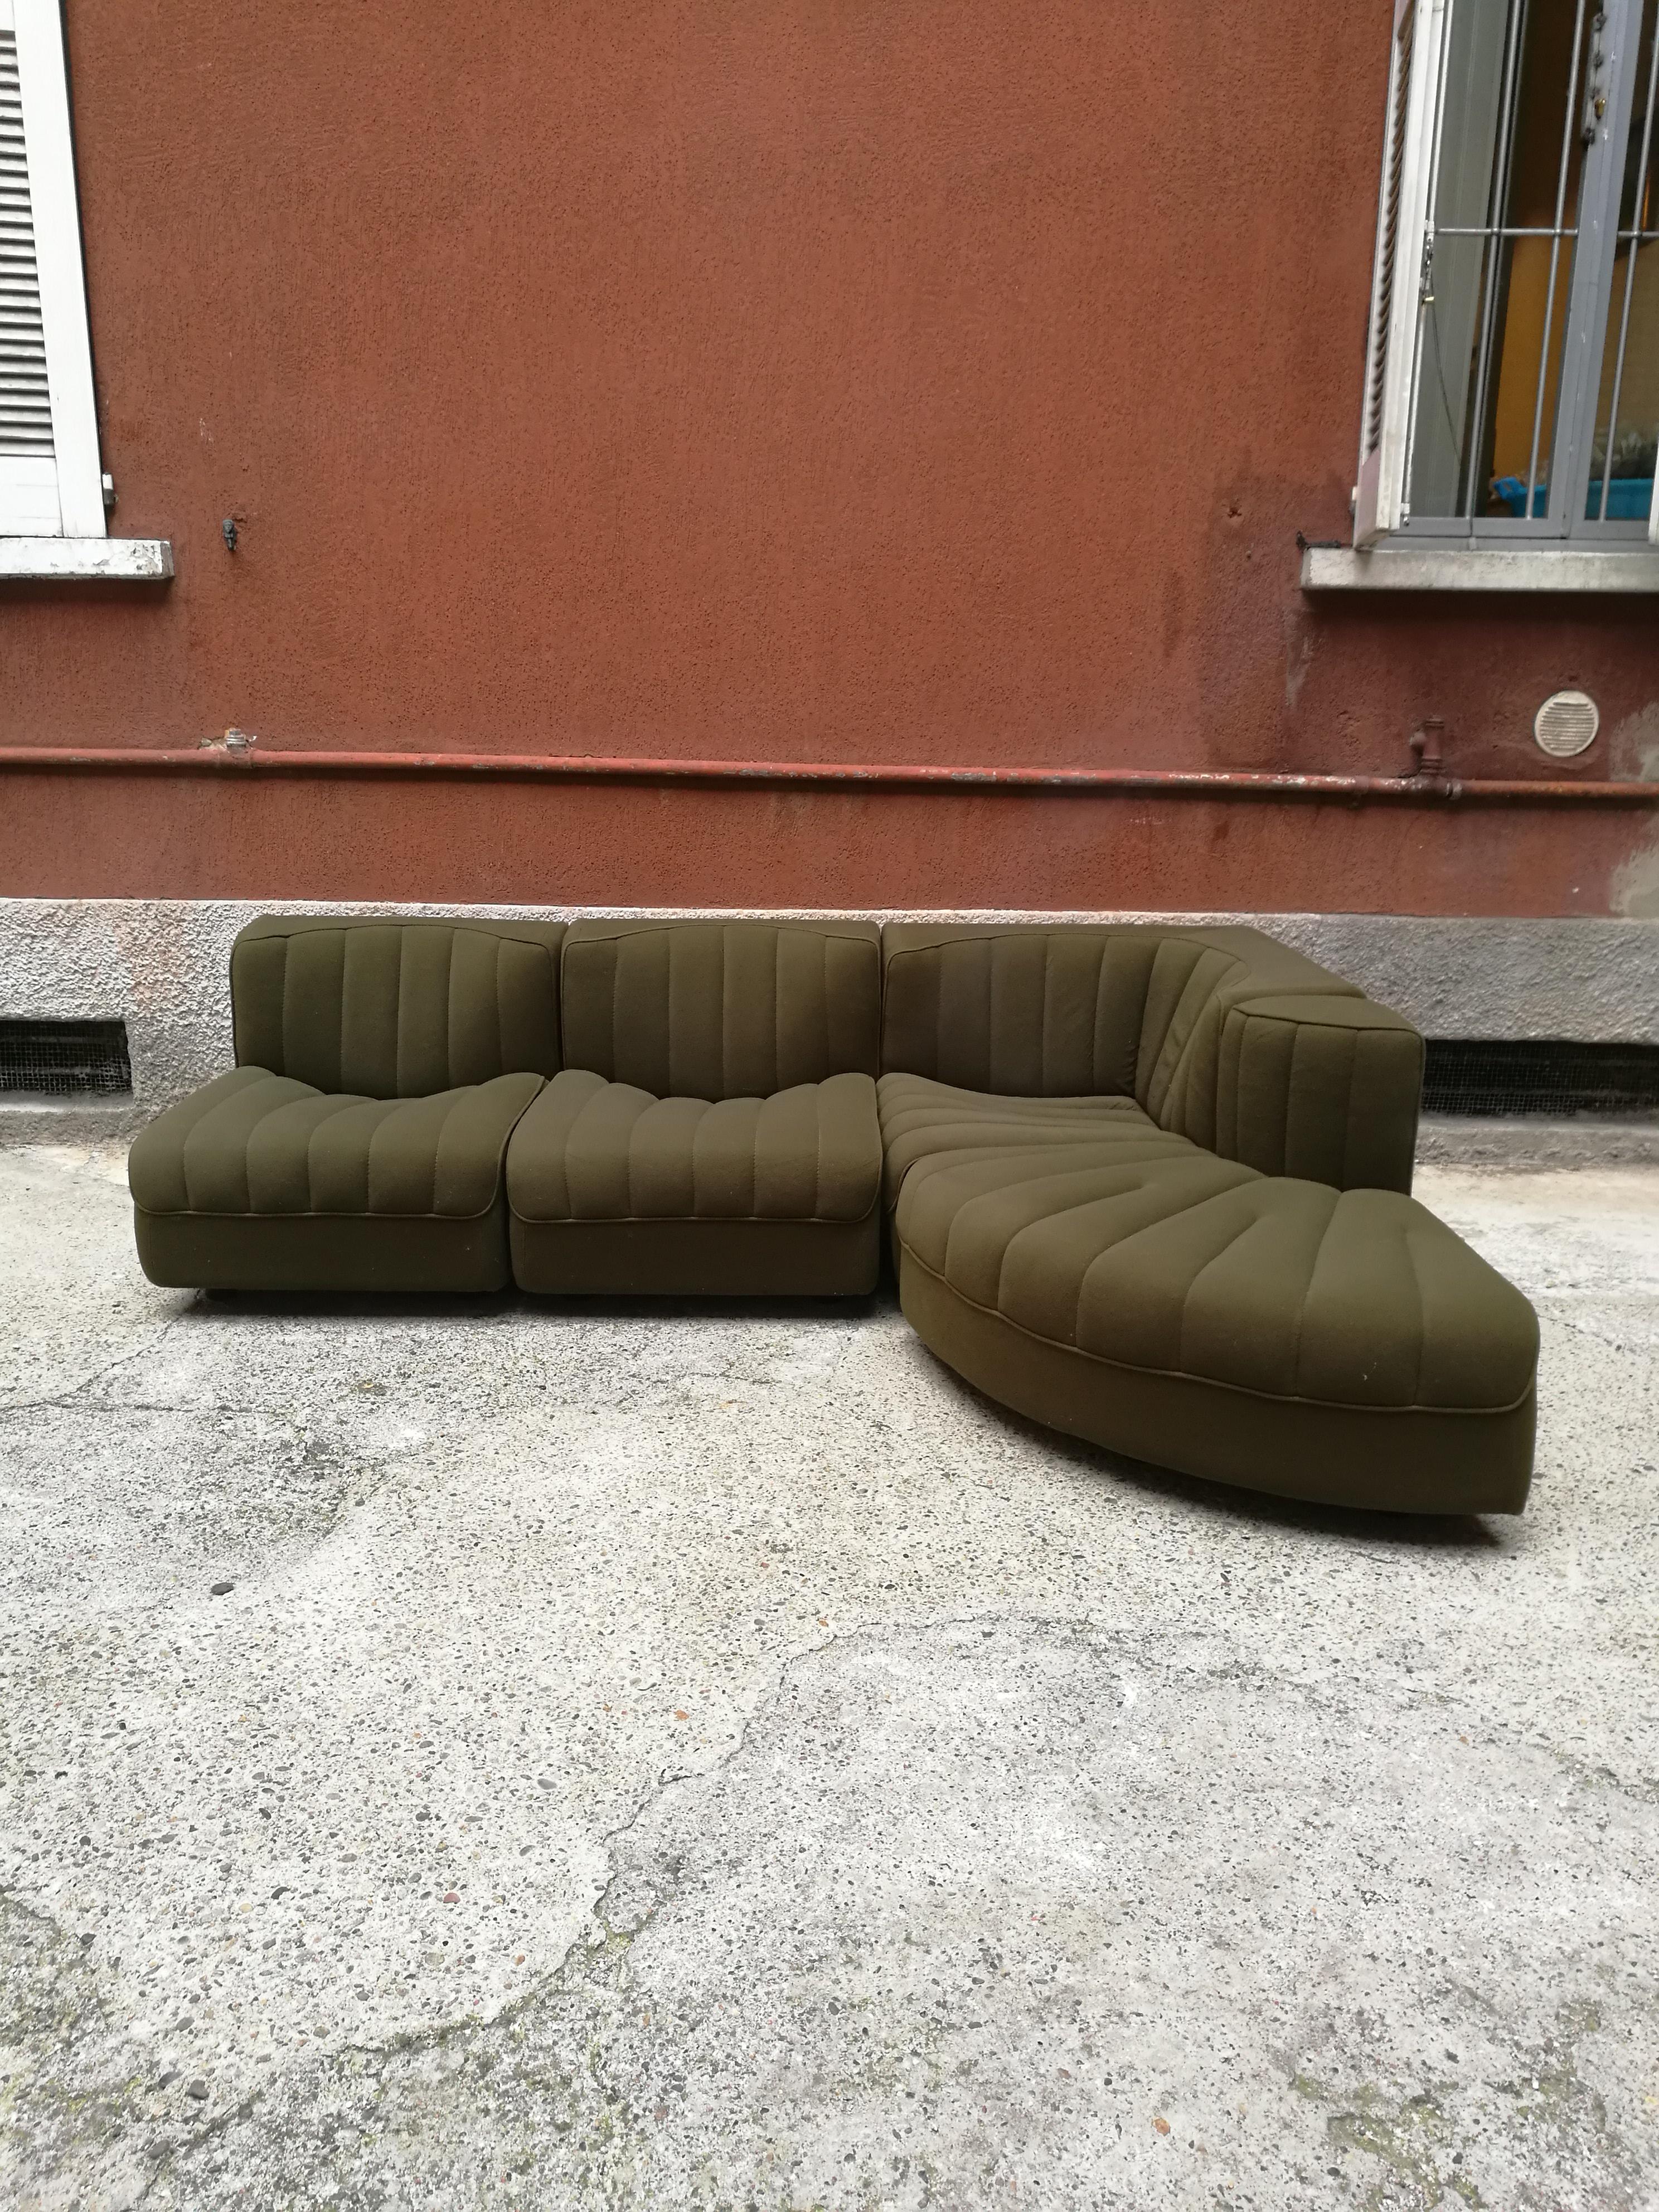 Italian olive green felt modular original sofa, 1970s
Unusual modular sofa from the 1970s. Arrange them as you like! Original olive green and similar to felt but very soft fabric upholstery. The Sofa consists of 4 modules, two of which twins, one